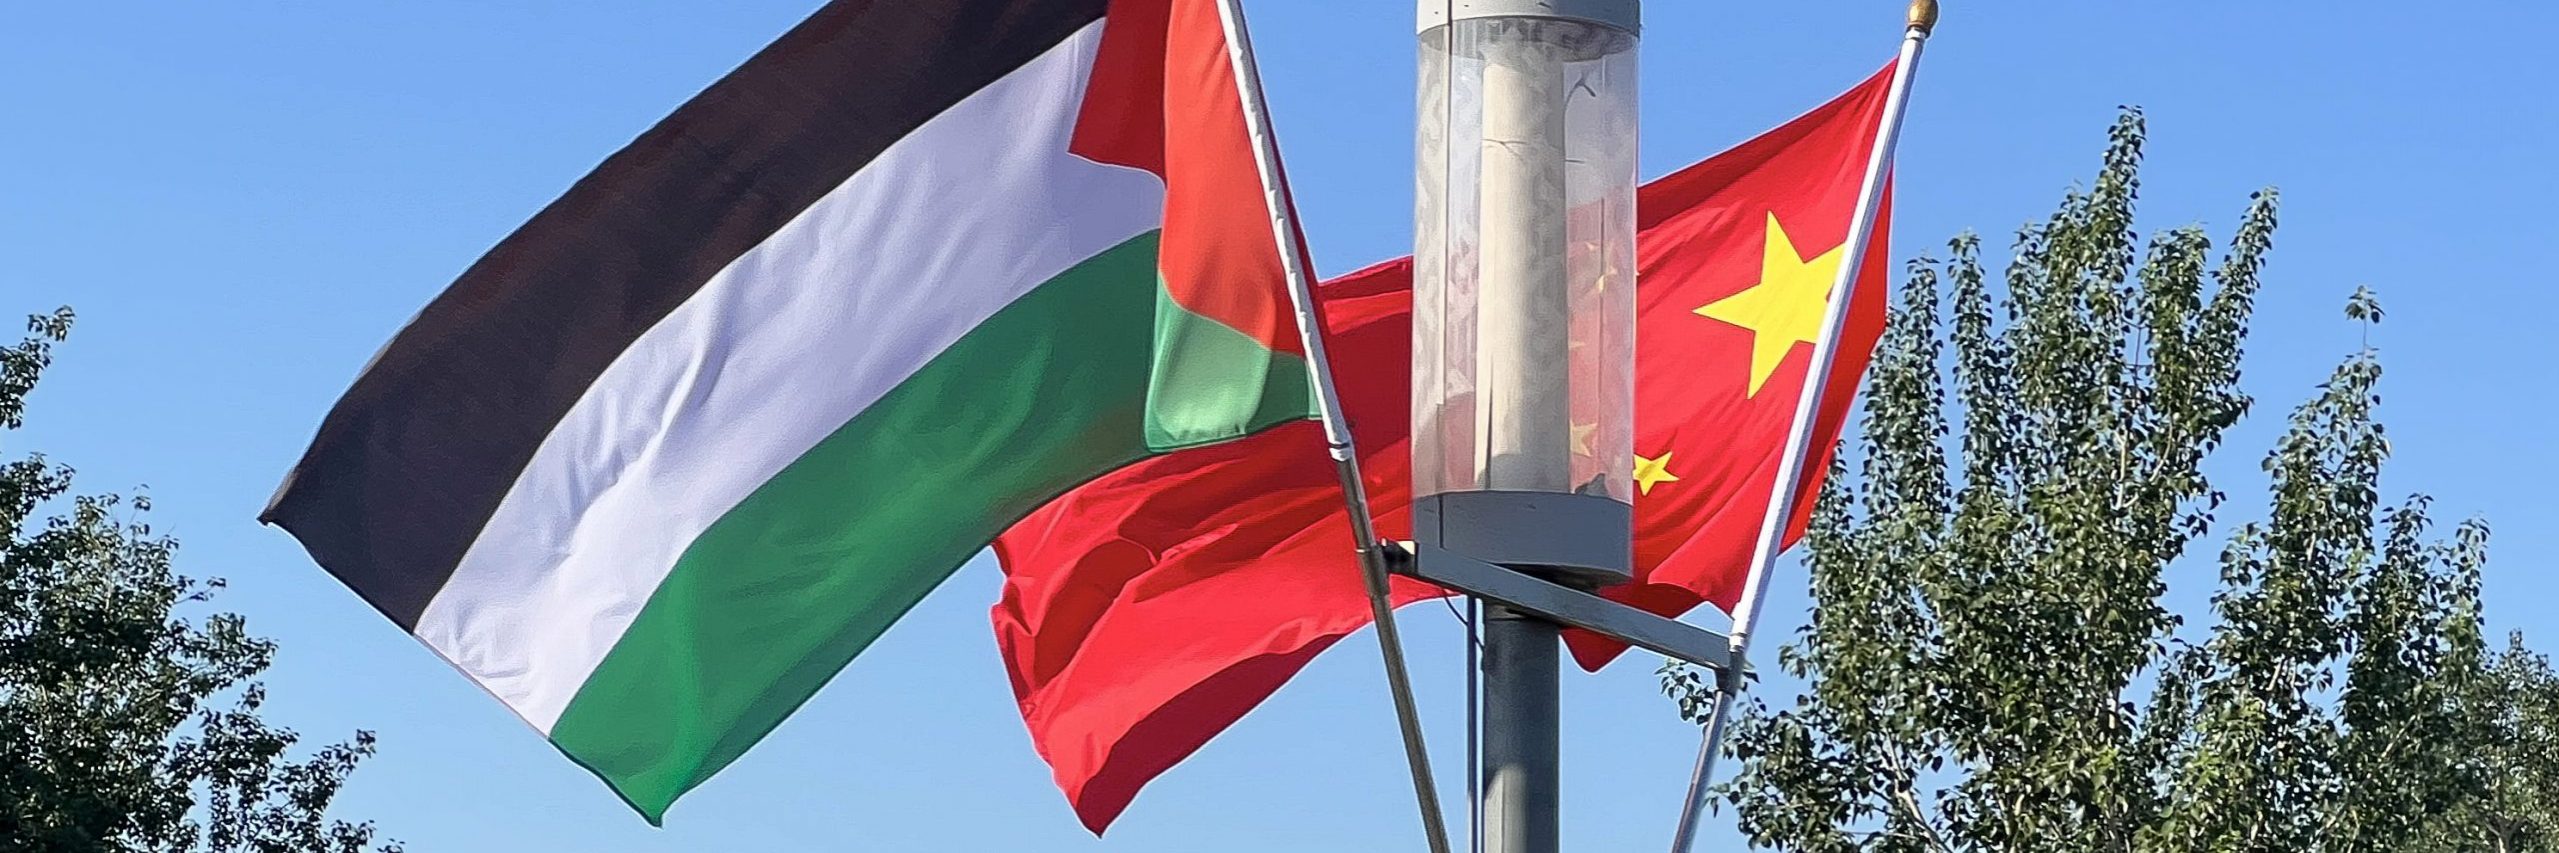 Palestinian and Chinese flags.